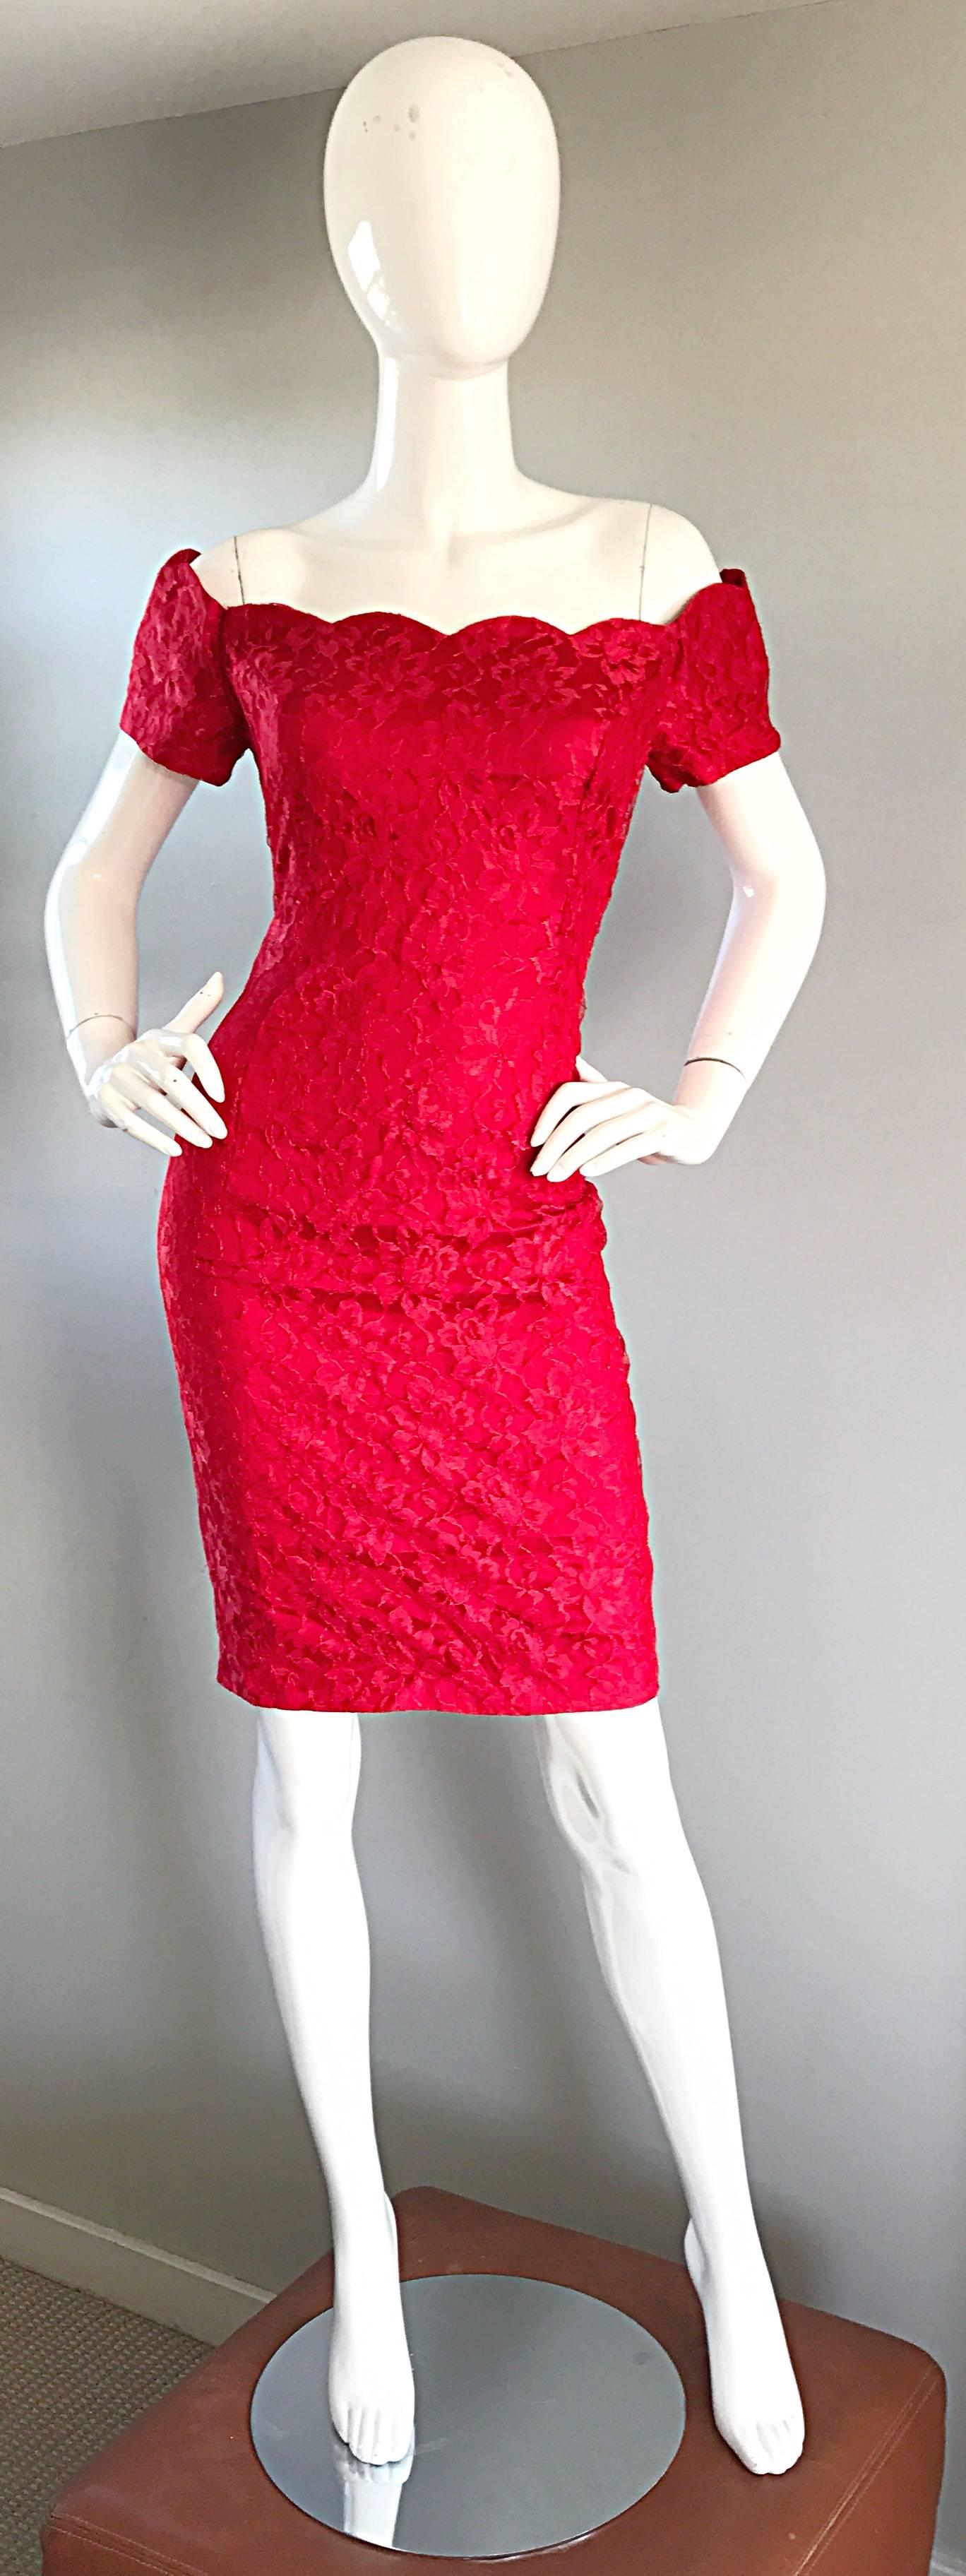 Amazing 90s lipstick red scalloped off-the-shoulder French Cantily lace cocktail dress! Feature intricate hand sewn French lace. Hidden zipper up the back. Scalloped edges at bodice and sleeves. Looks amazing on! Great belted or alone. Perfect with